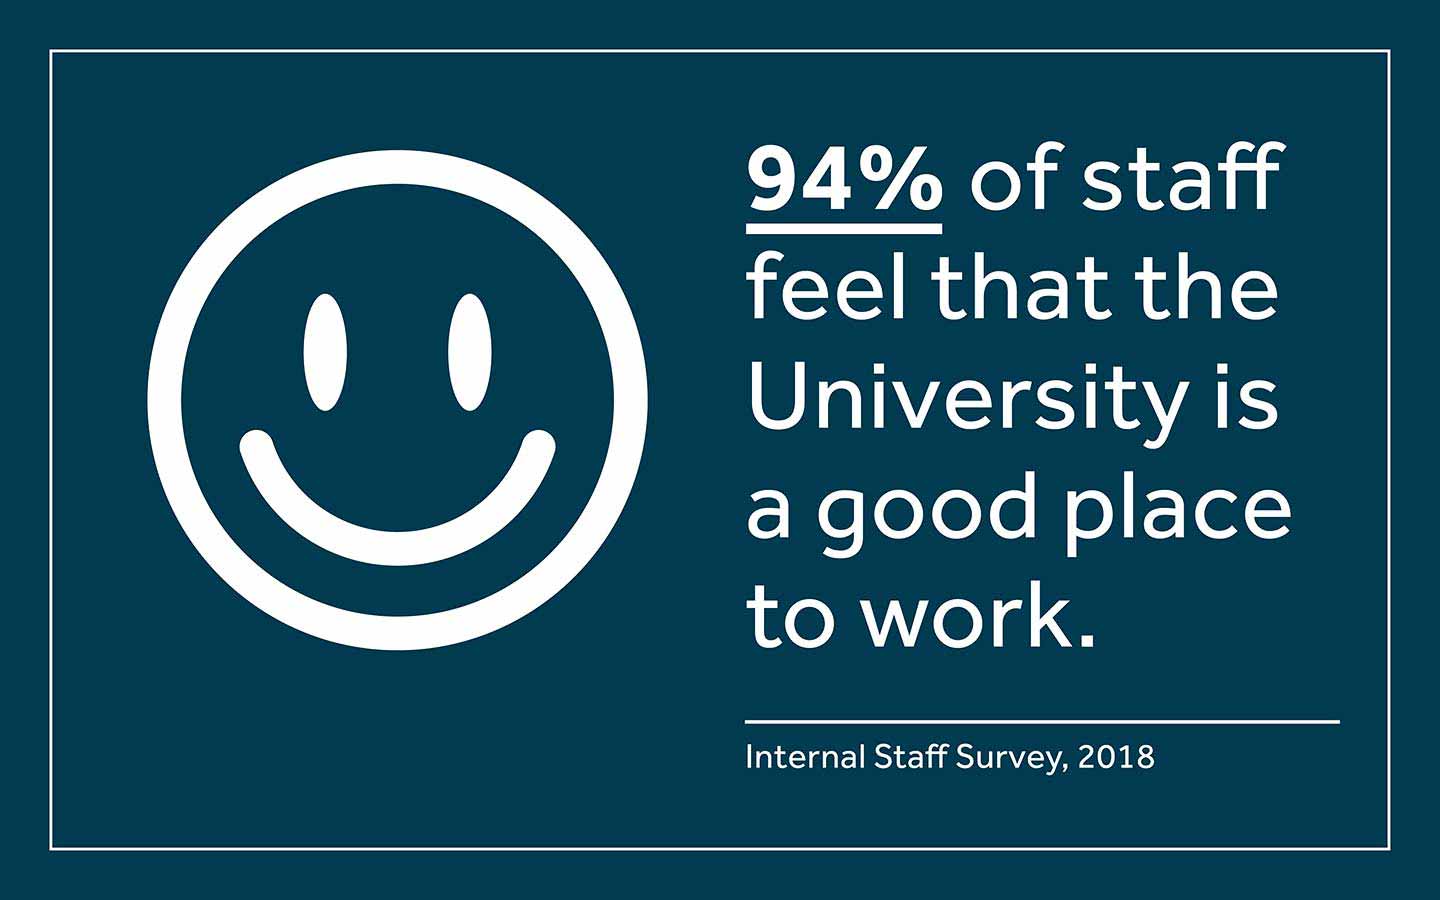 94% of staff believe the University is a good place to work